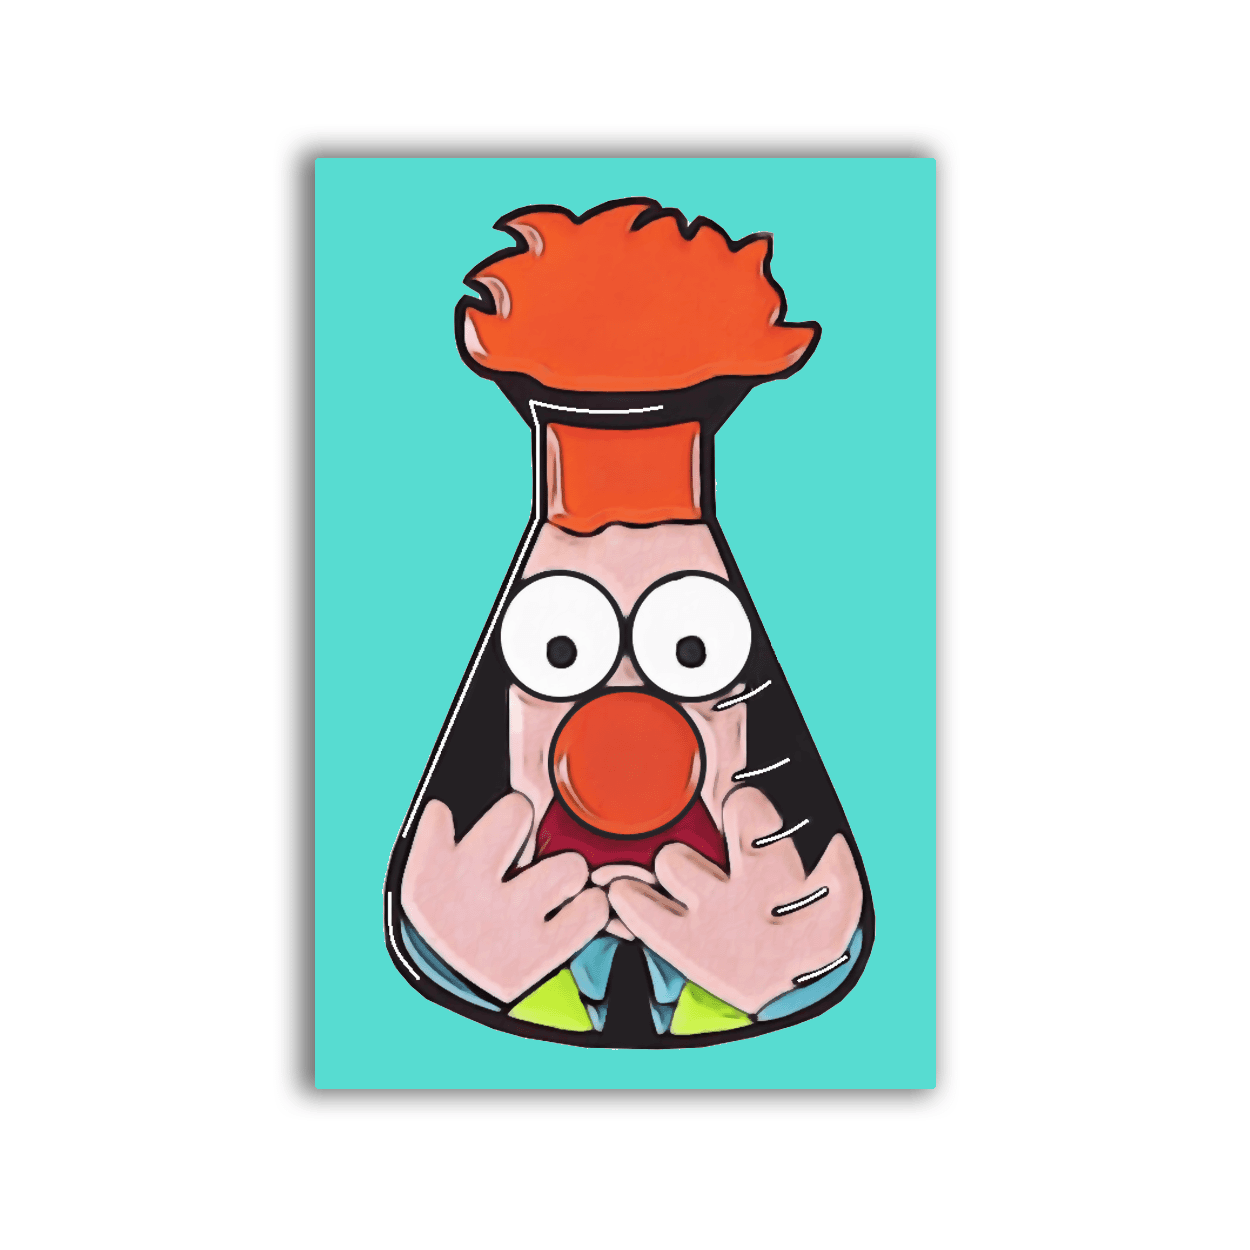 2x3 colorful magnet with image of the muppet named Beaker trapped in a Erlenmeyer Flask